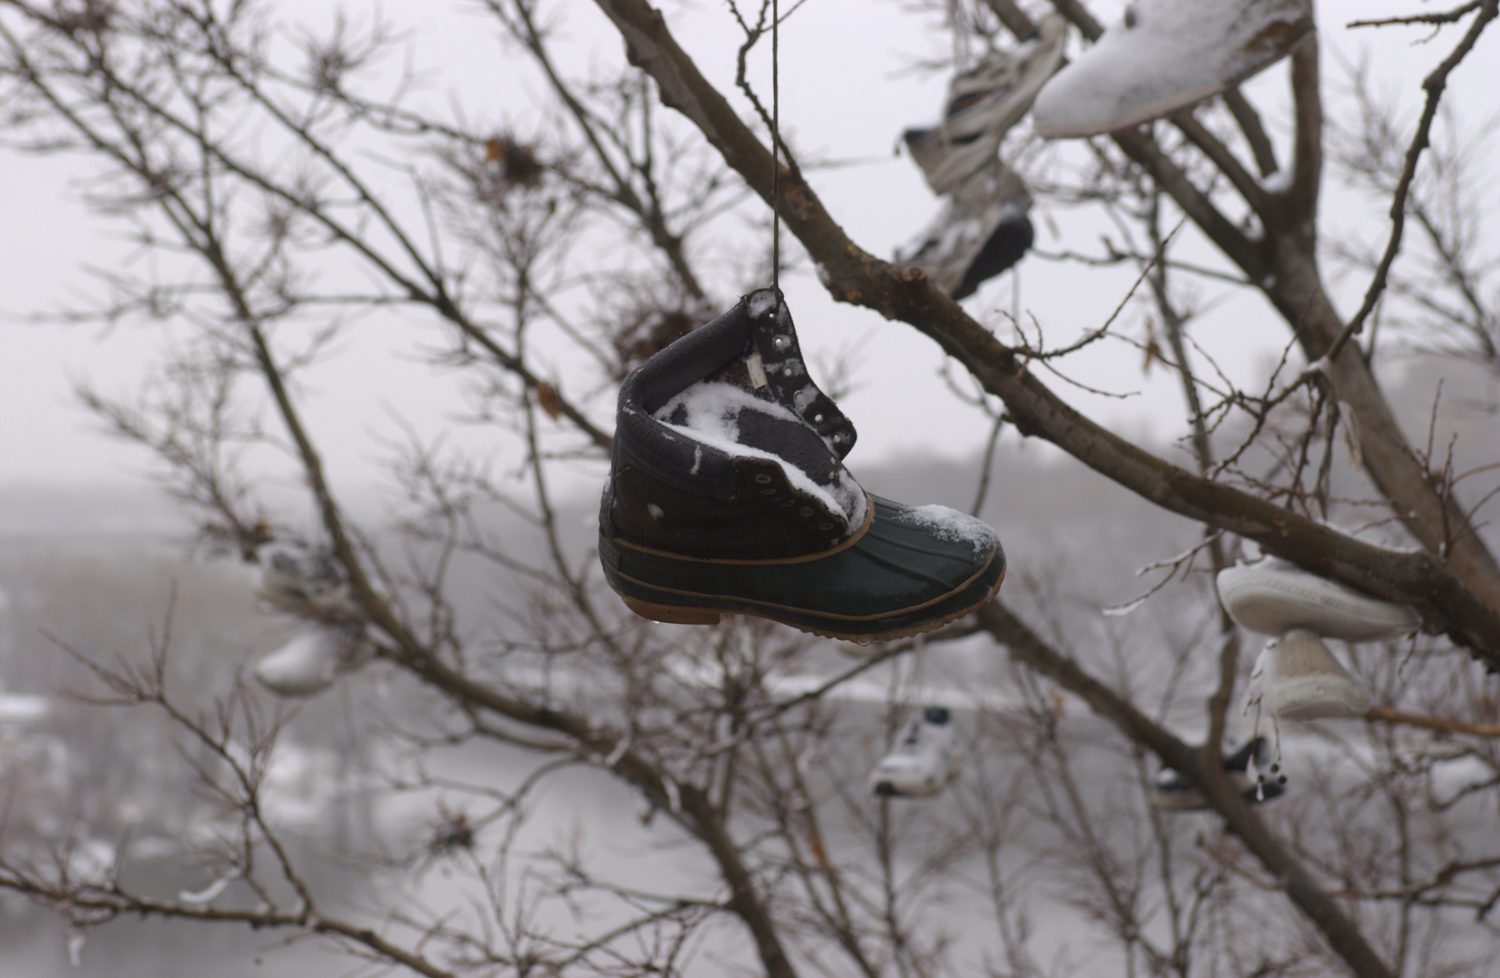 A single winter boot covered in snow hanging from an unseen branch. The Mississippi River is in the background.